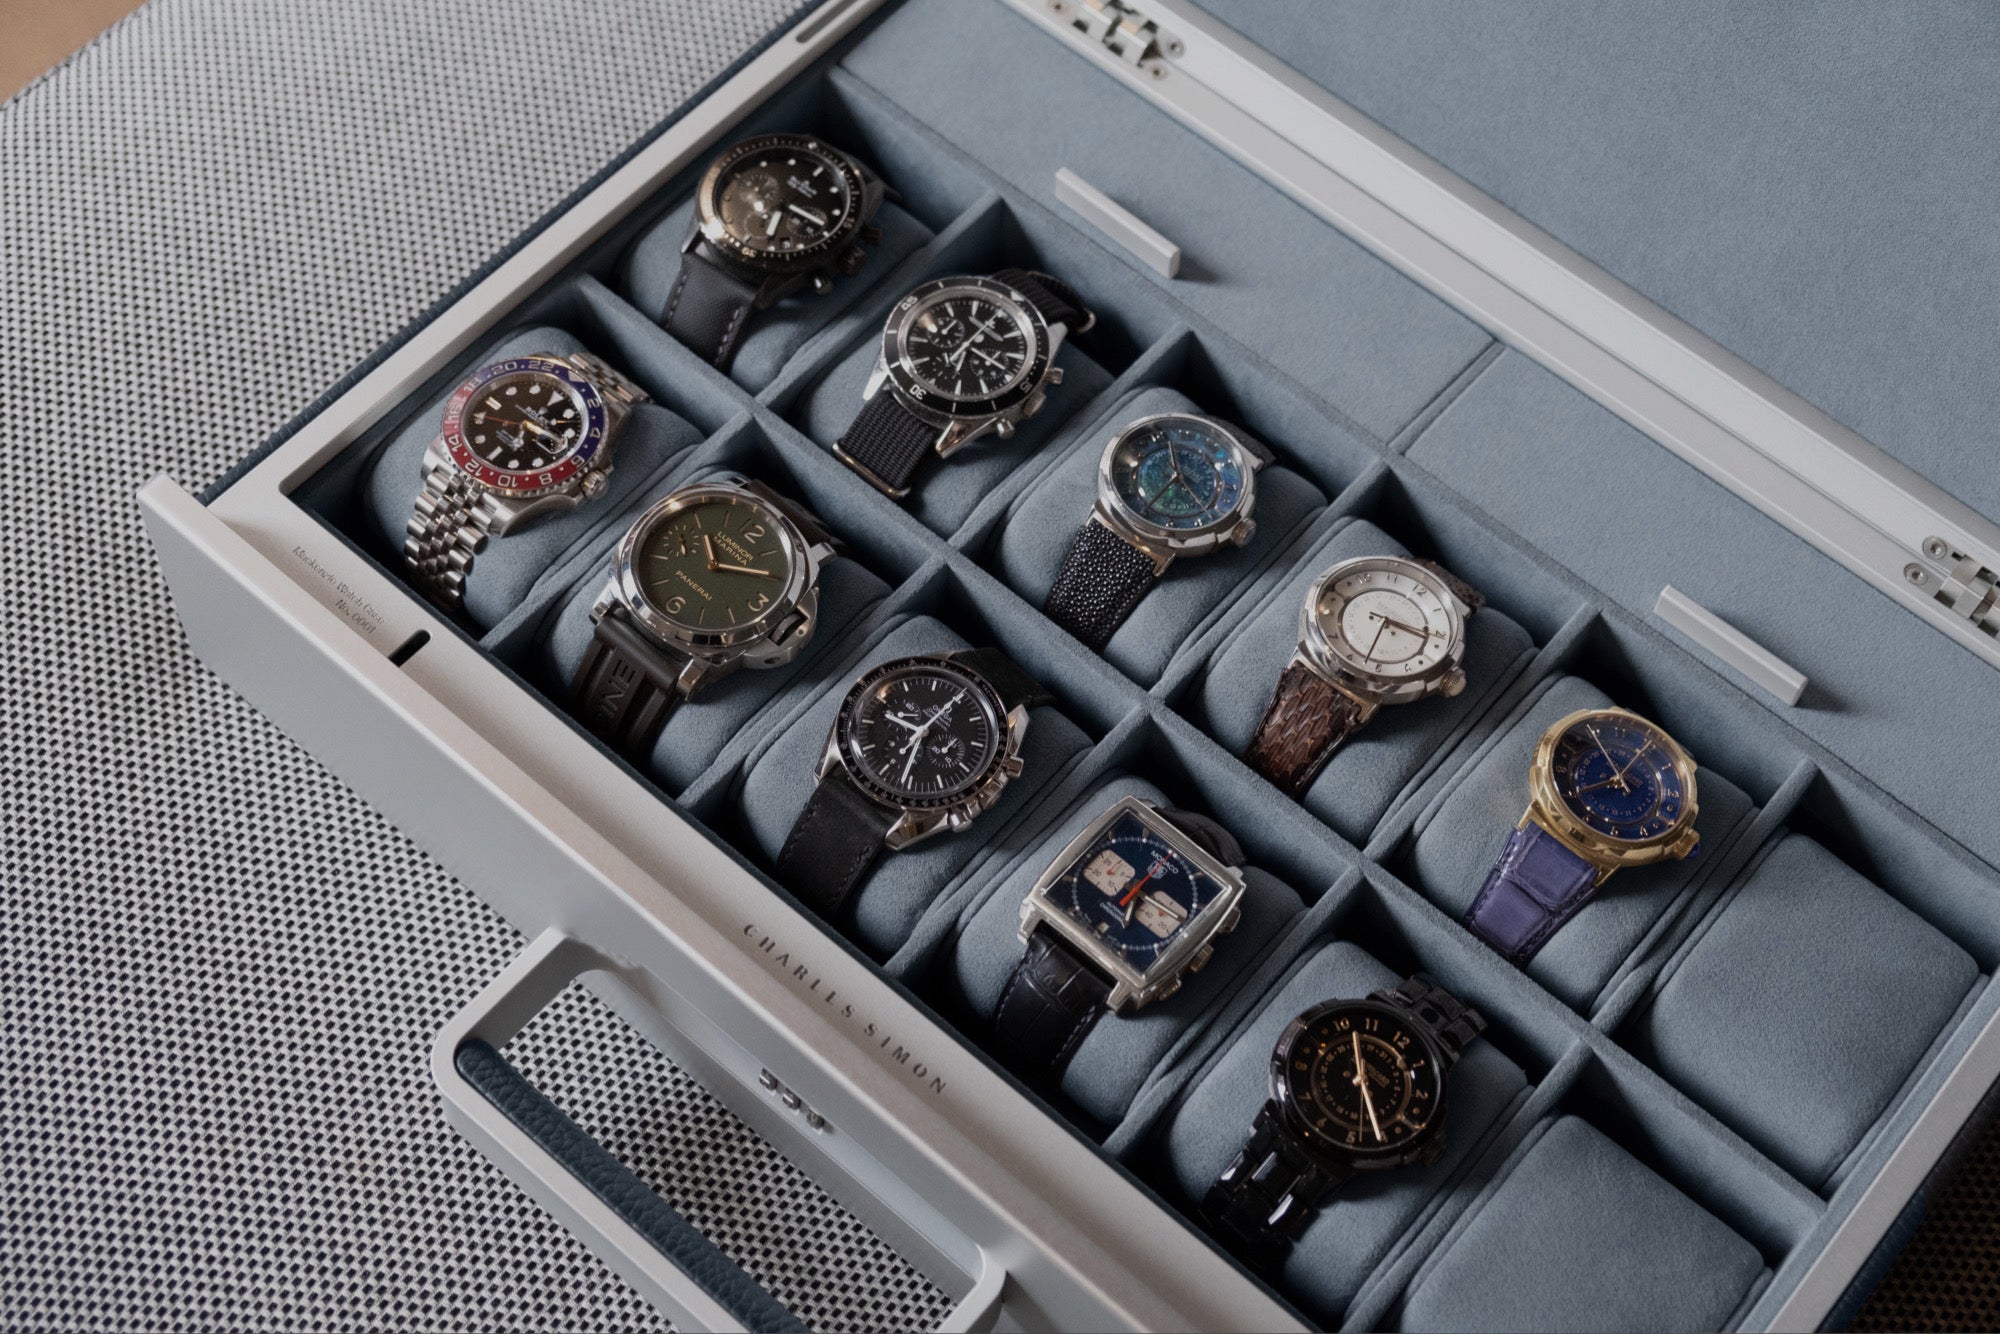 Watch Collecting 101: Must-Have Watch Types Every Collector Needs